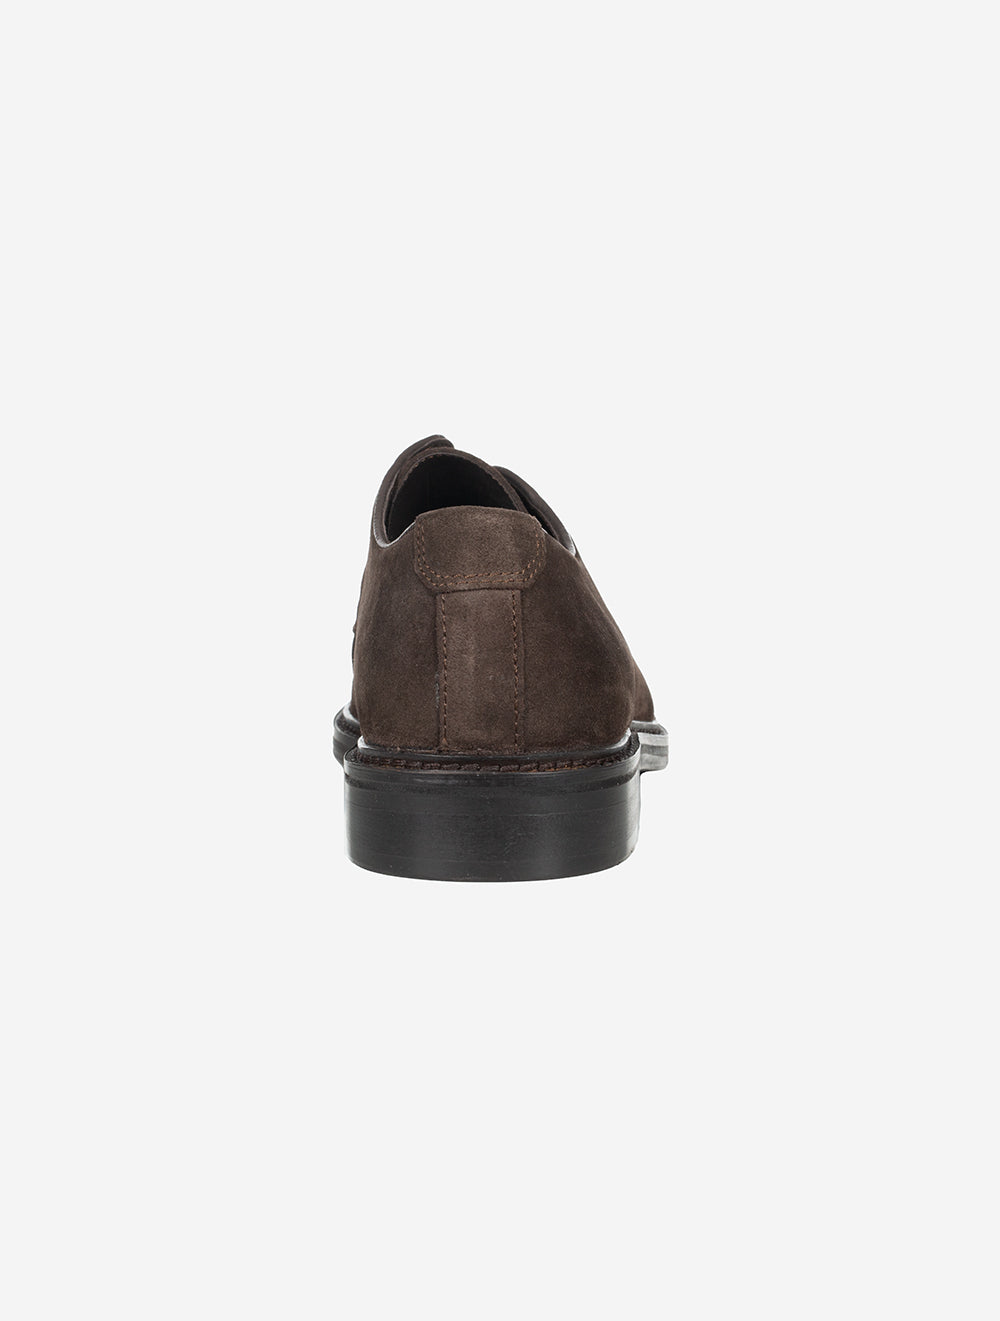 Bidford Suede Low Lace Shoe-Coffee Brown